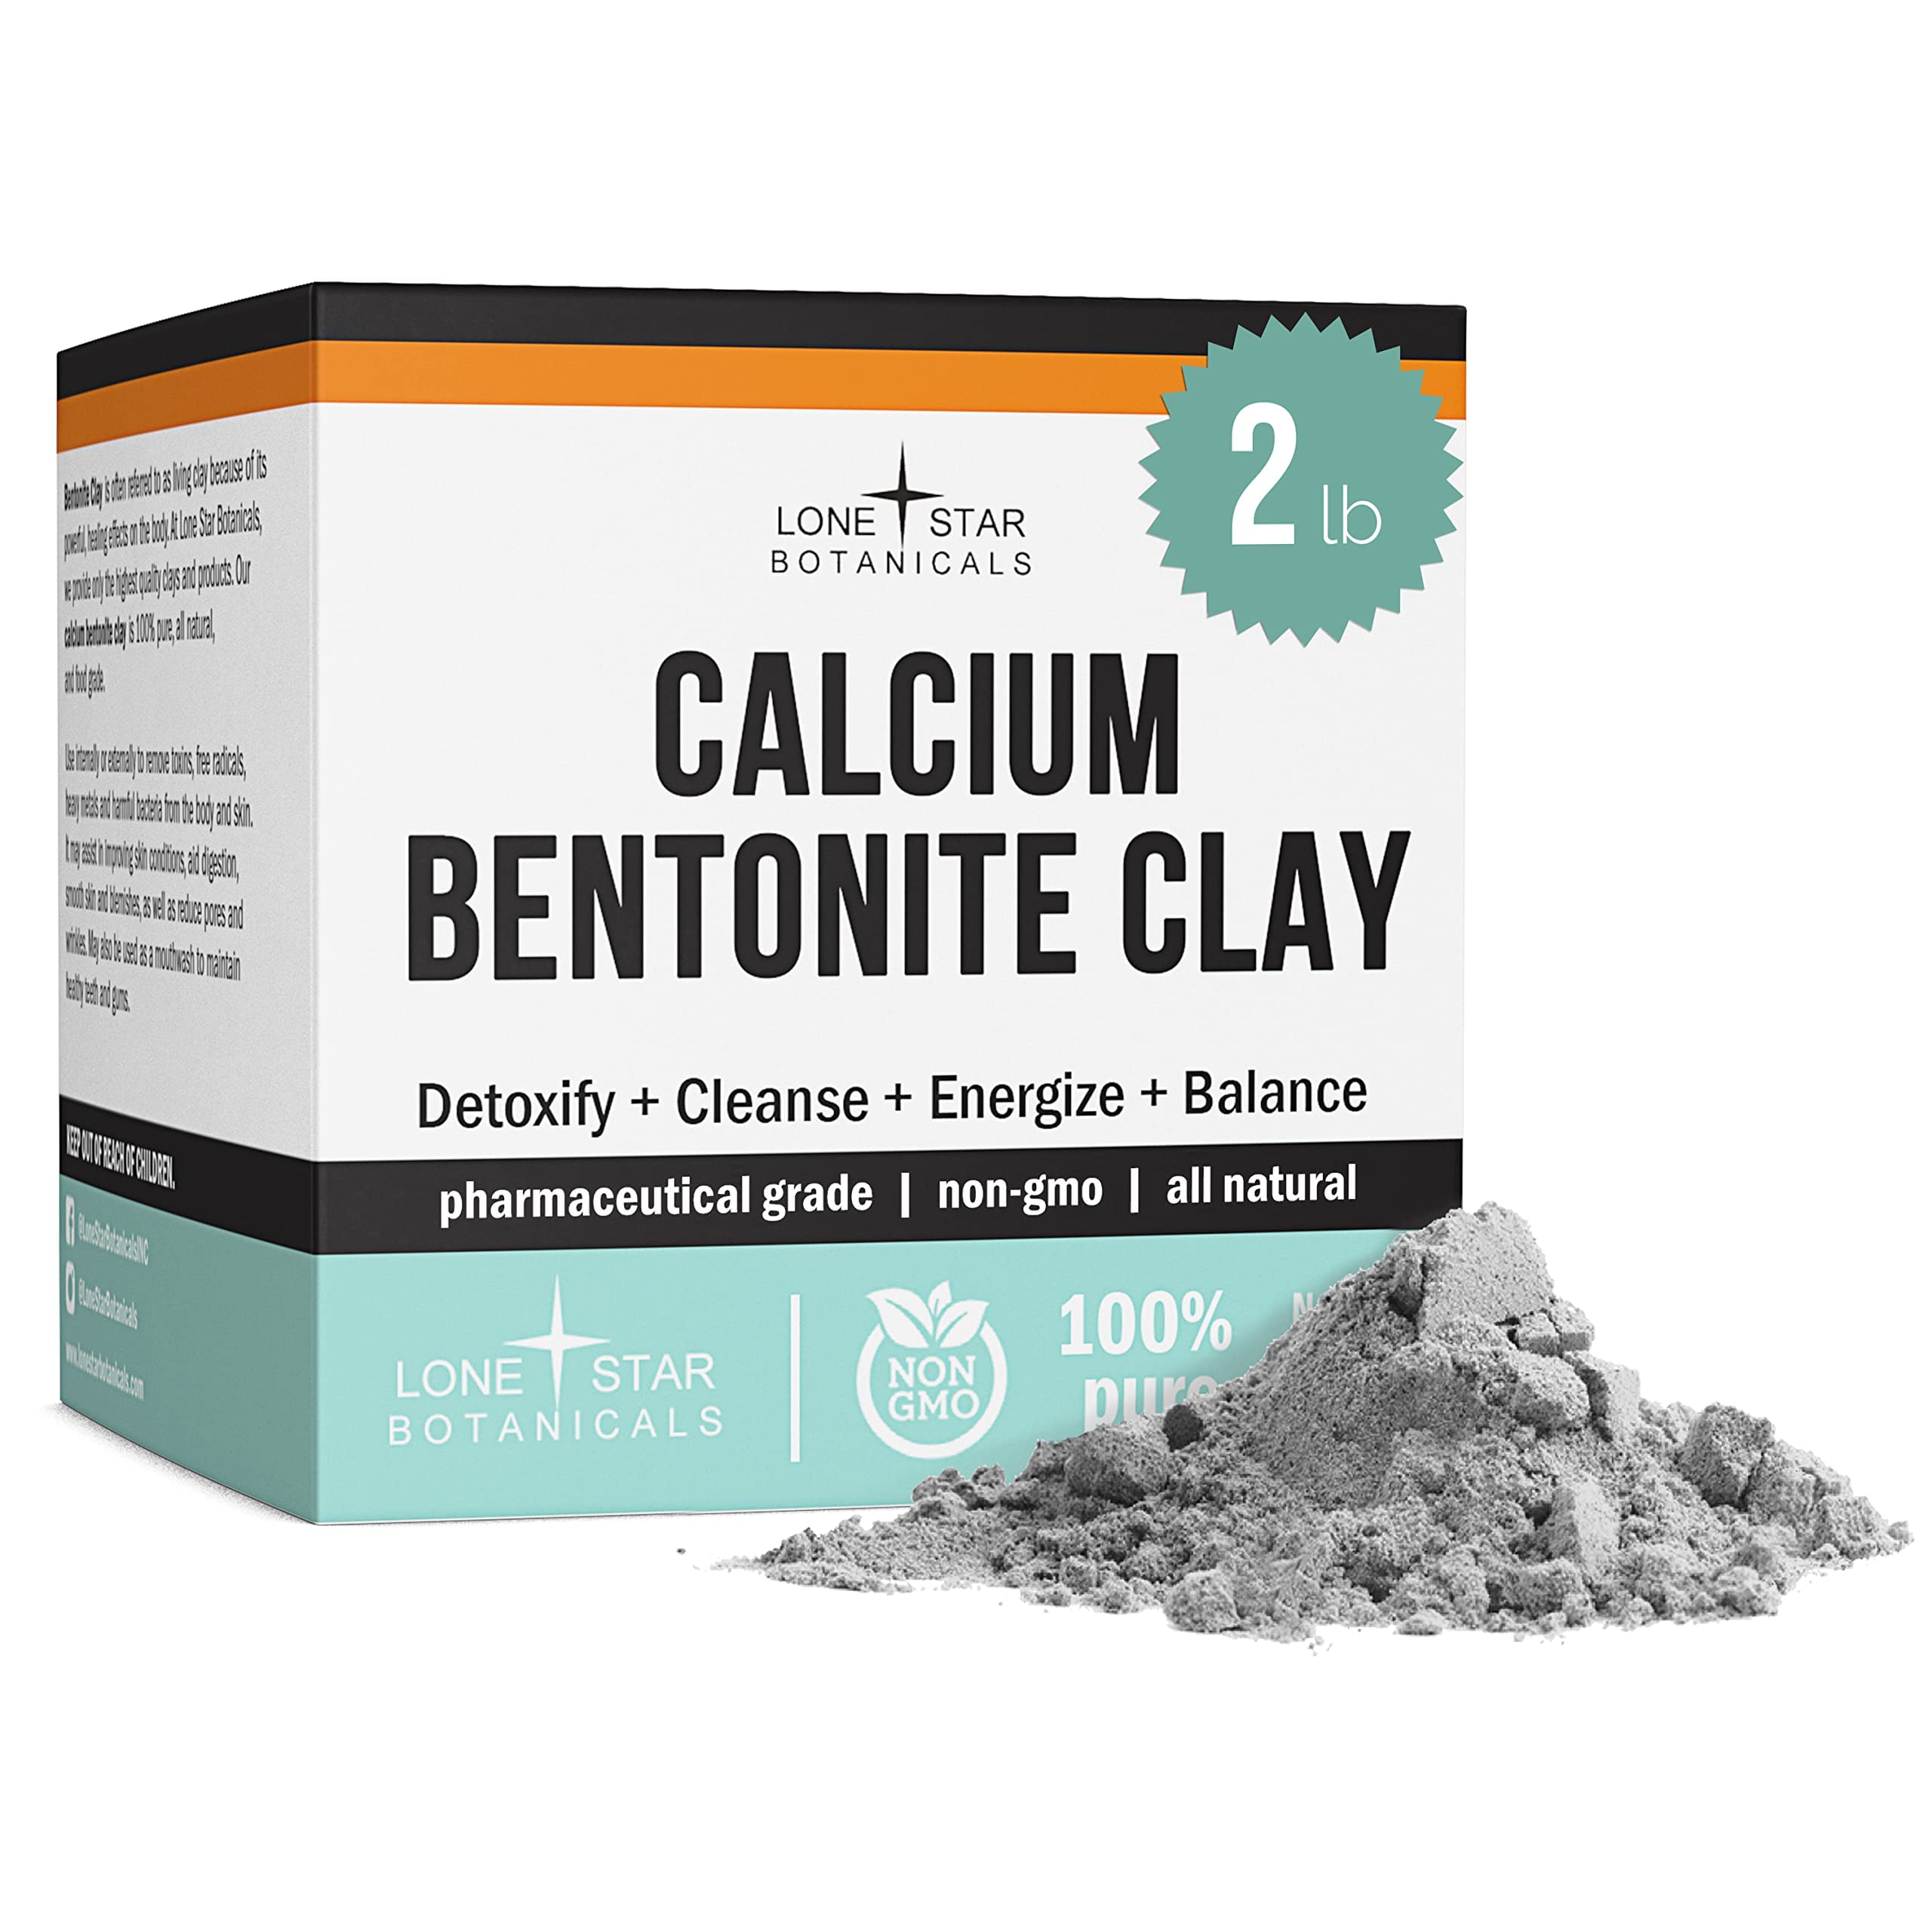 Bentonite Clay: How to Use this Product to Nourish Natural Hair | All  Things Hair US